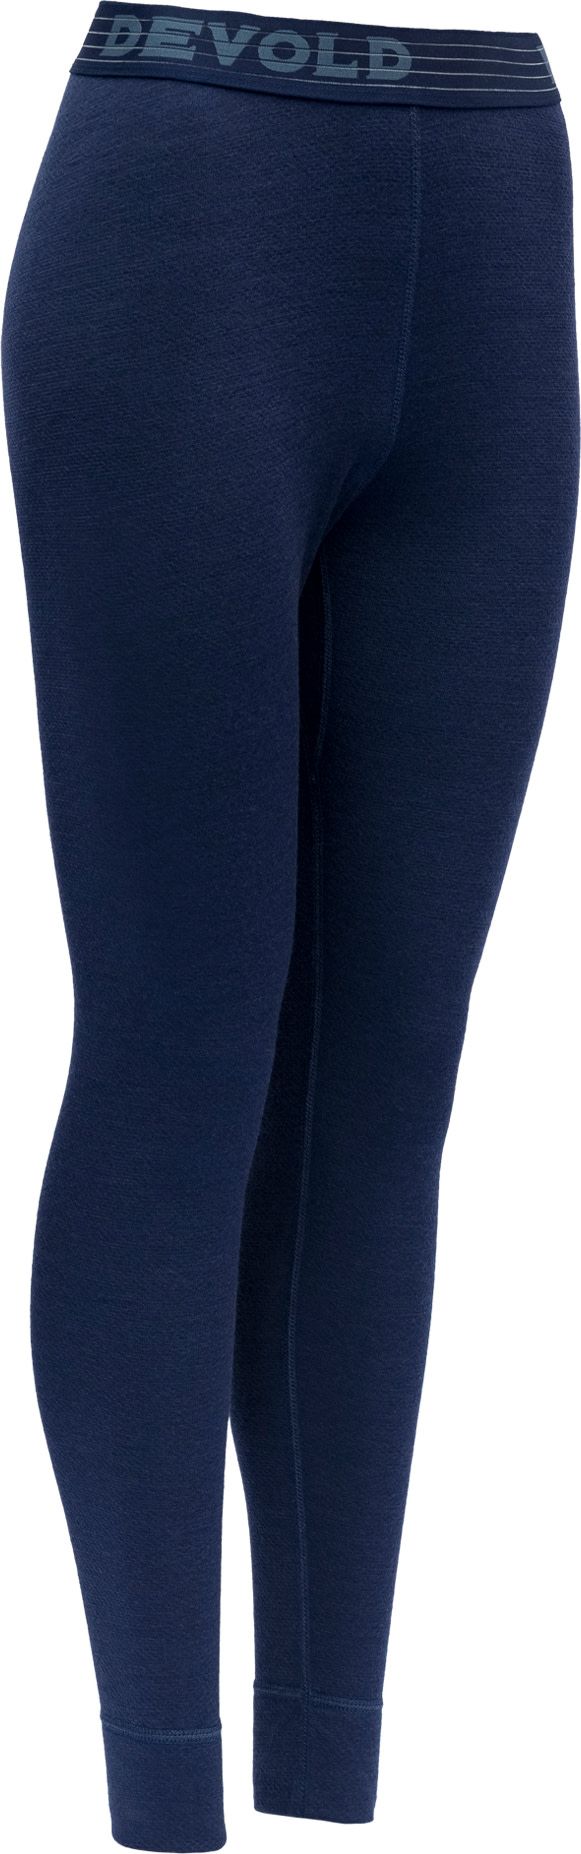 Devold Women's Expedition Long Johns EVENING Devold